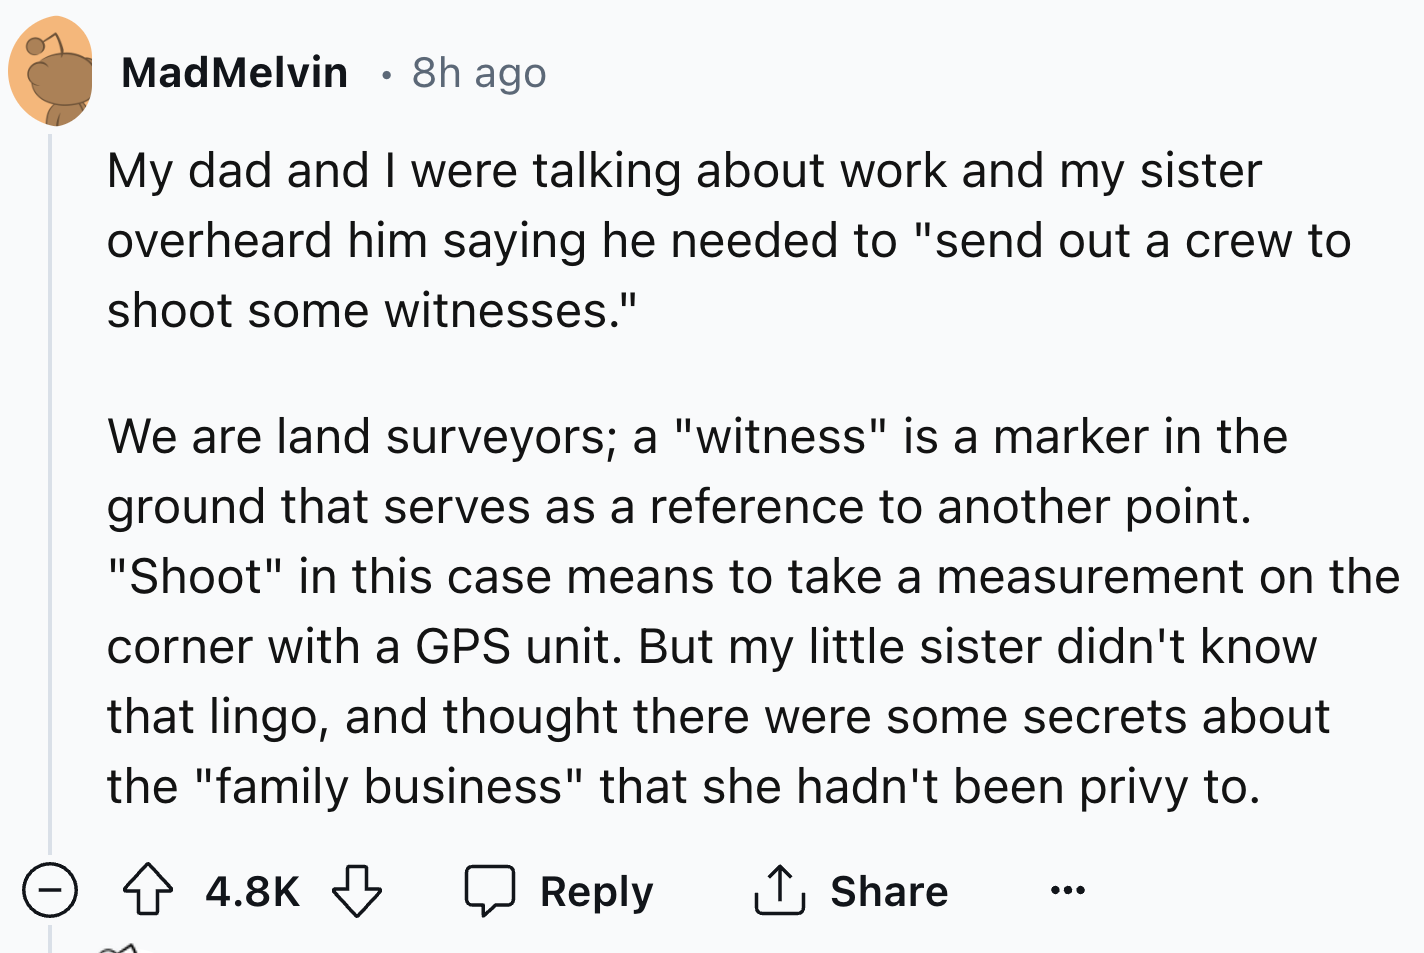 screenshot - MadMelvin 8h ago My dad and I were talking about work and my sister overheard him saying he needed to "send out a crew to shoot some witnesses." We are land surveyors; a "witness" is a marker in the ground that serves as a reference to anothe